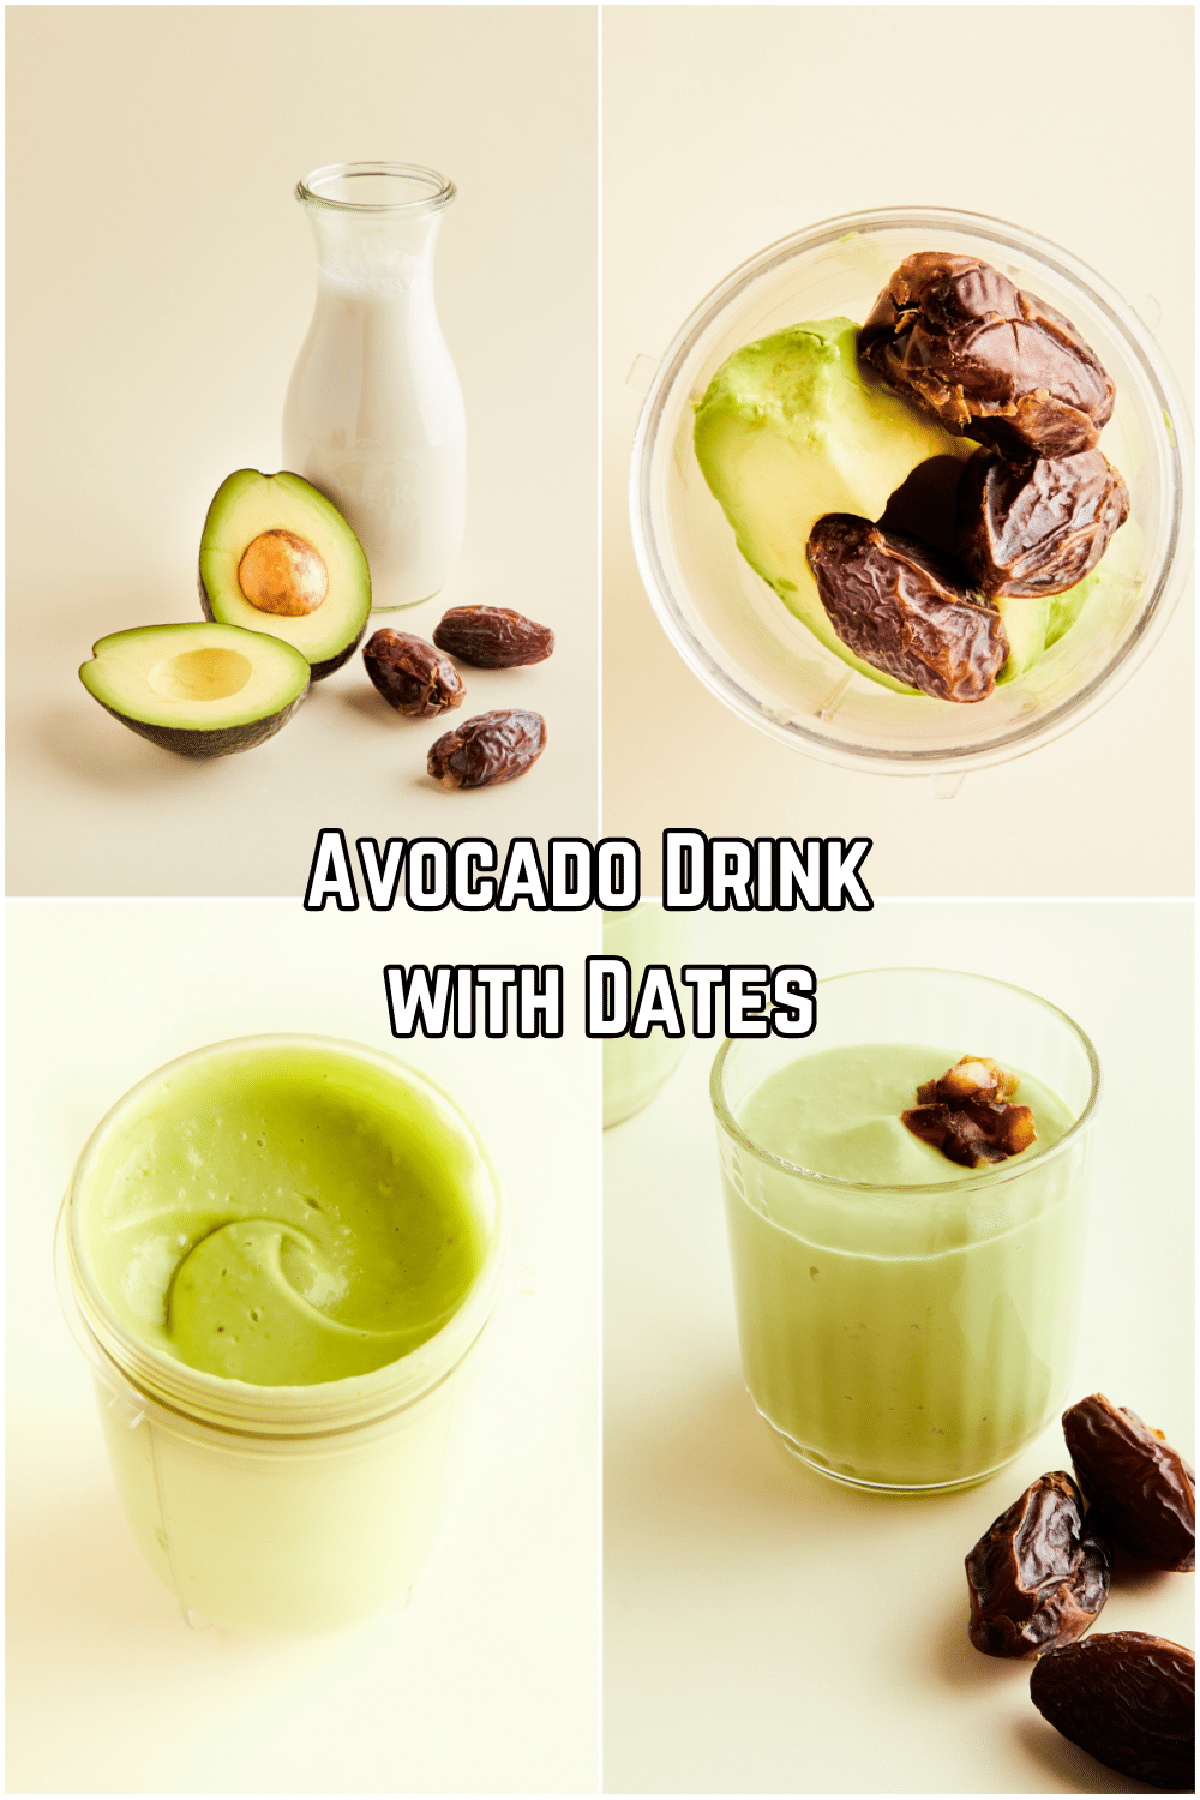 A four image collage shows how to make es pokat avocado smoothie with dates.